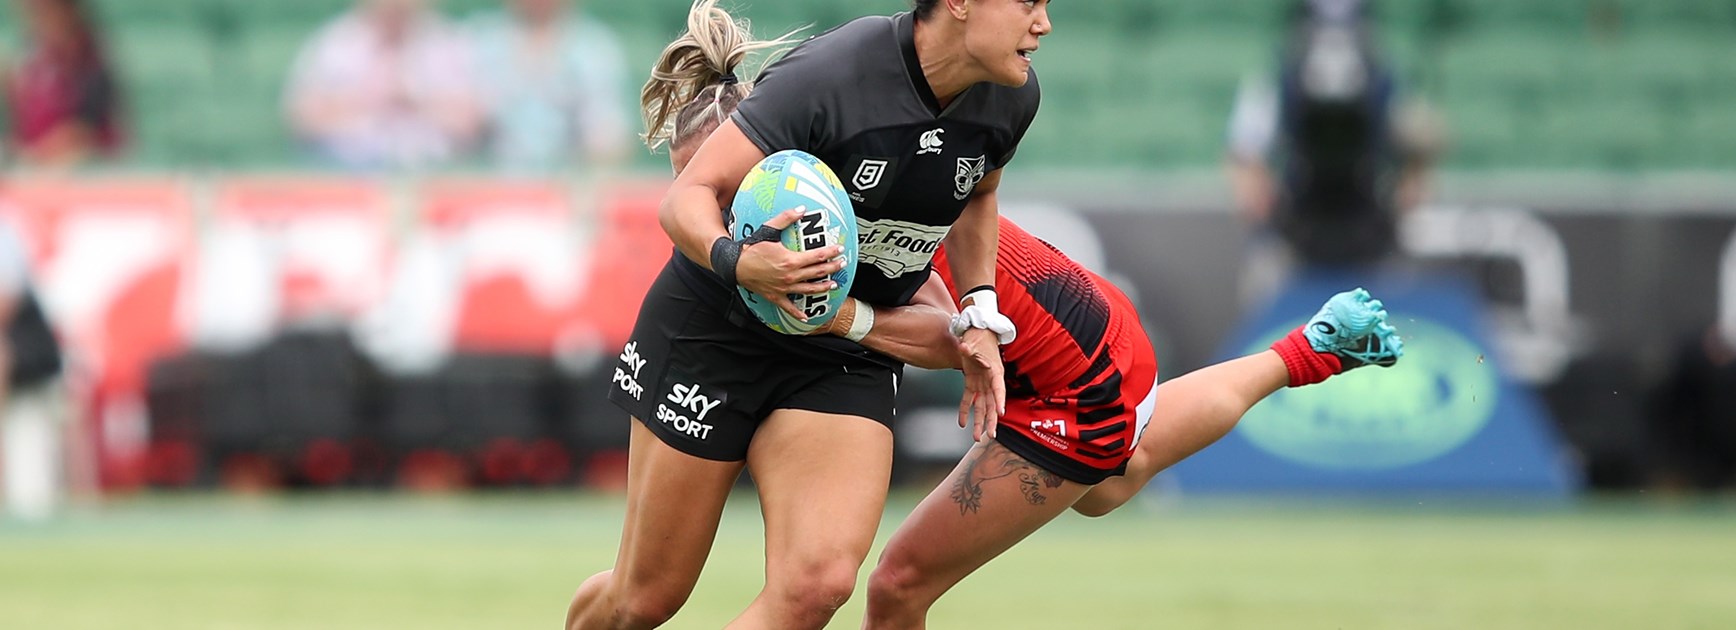 Stowers, Bartlett among four new NRLW signings